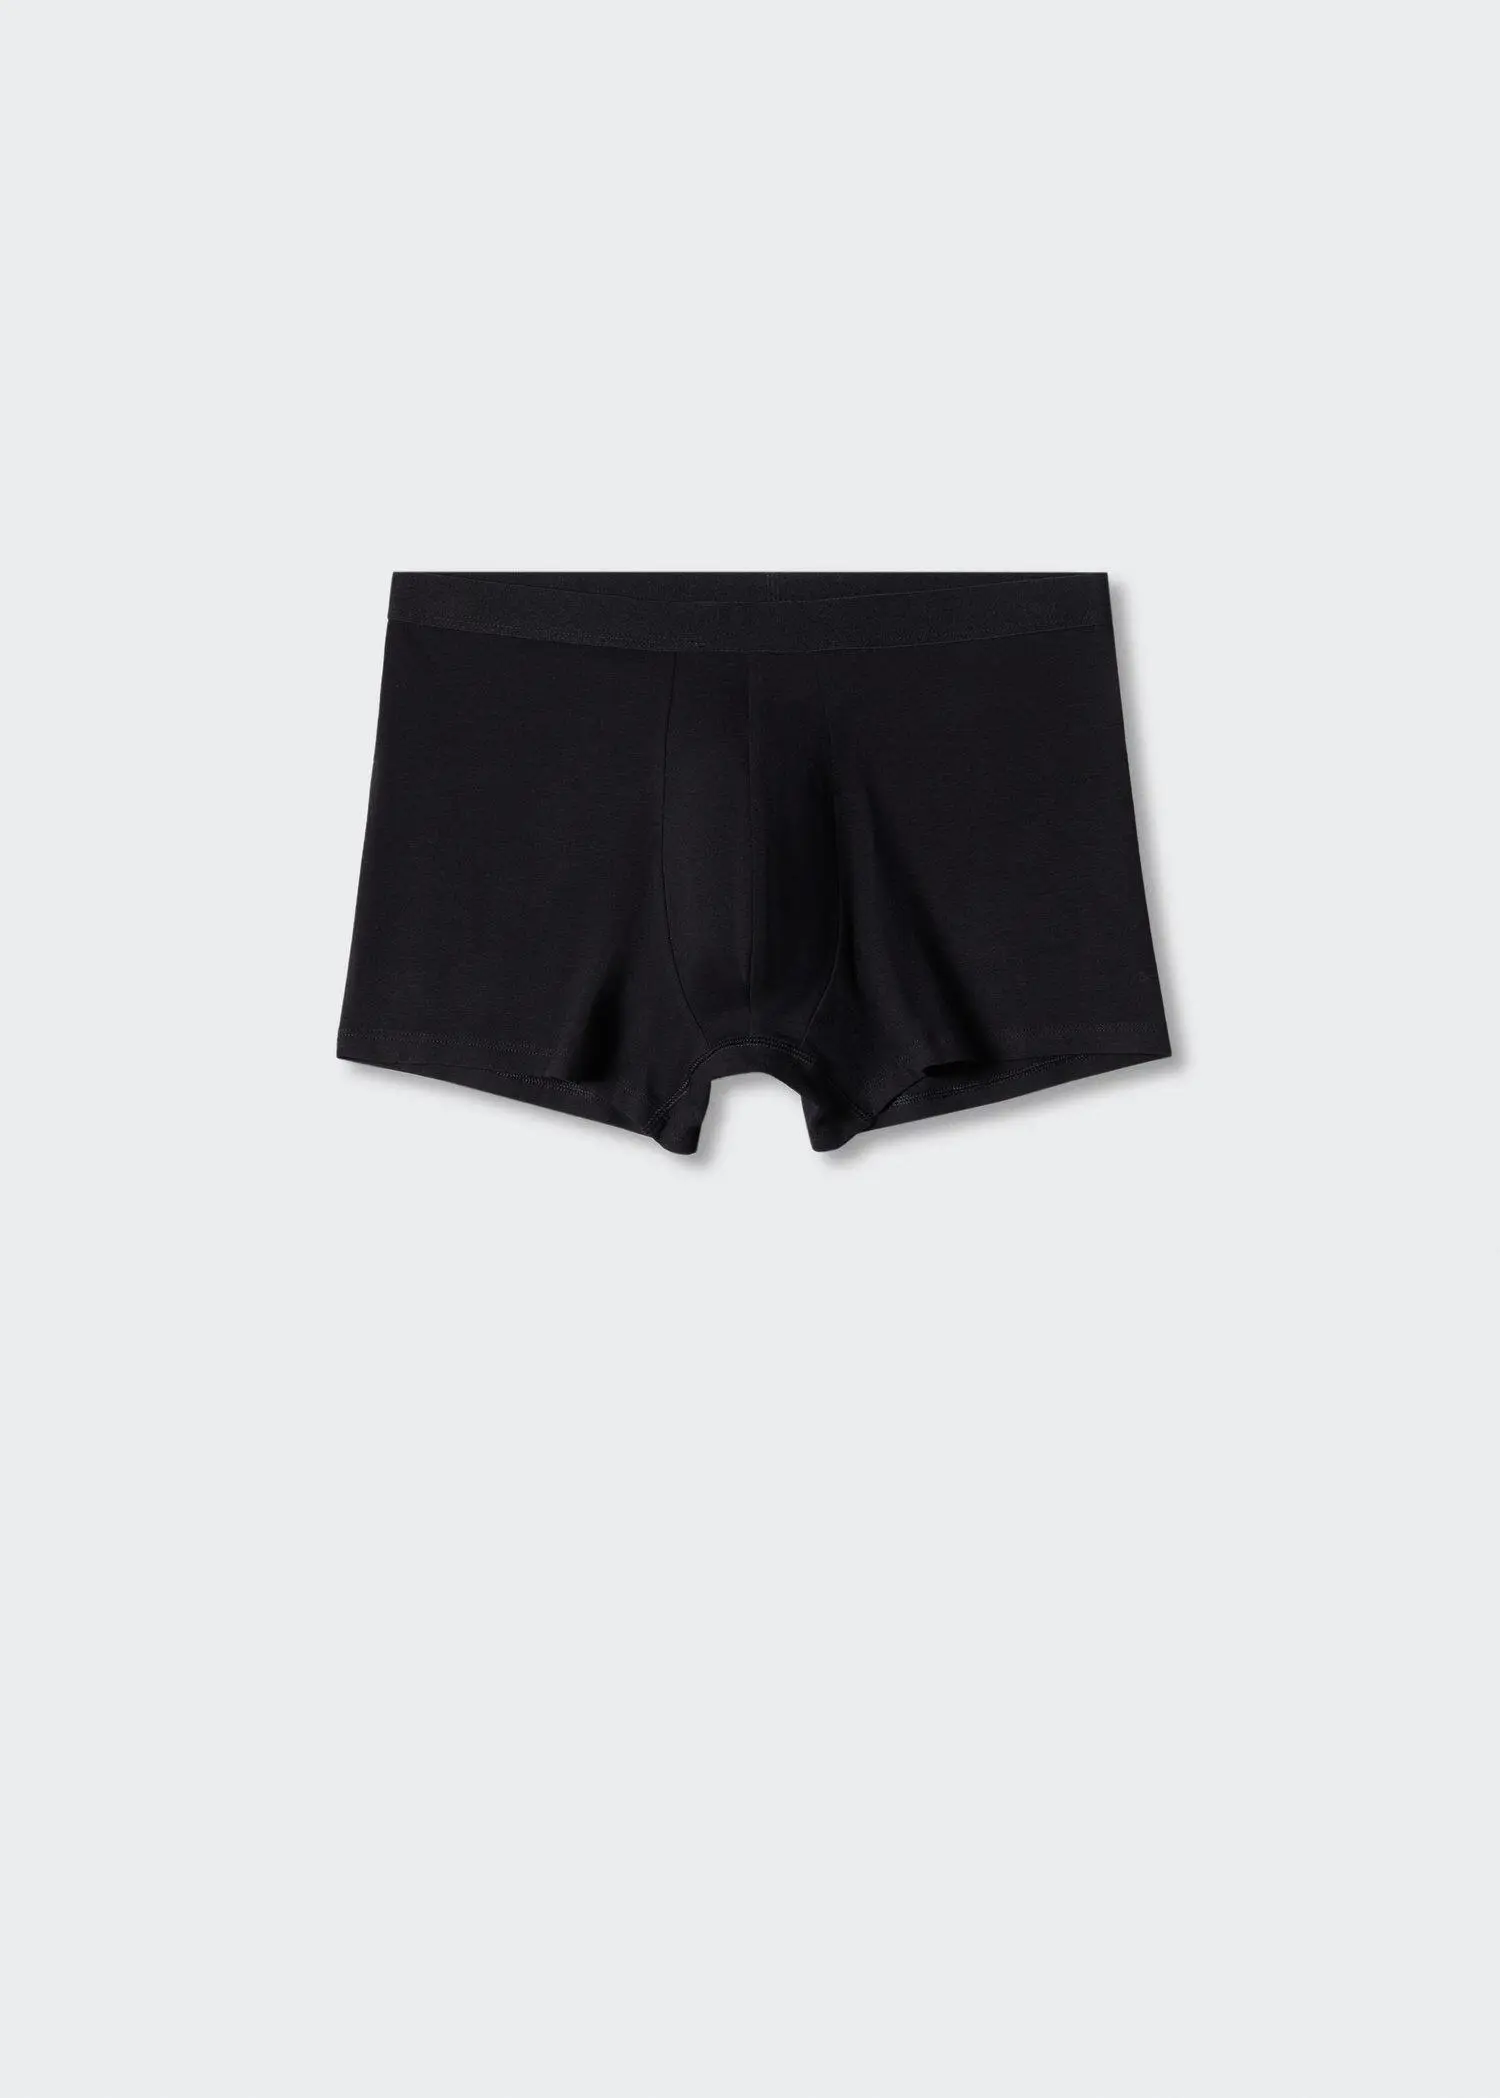 Mango 3-pack cotton boxers. a pair of black shorts on a white background. 